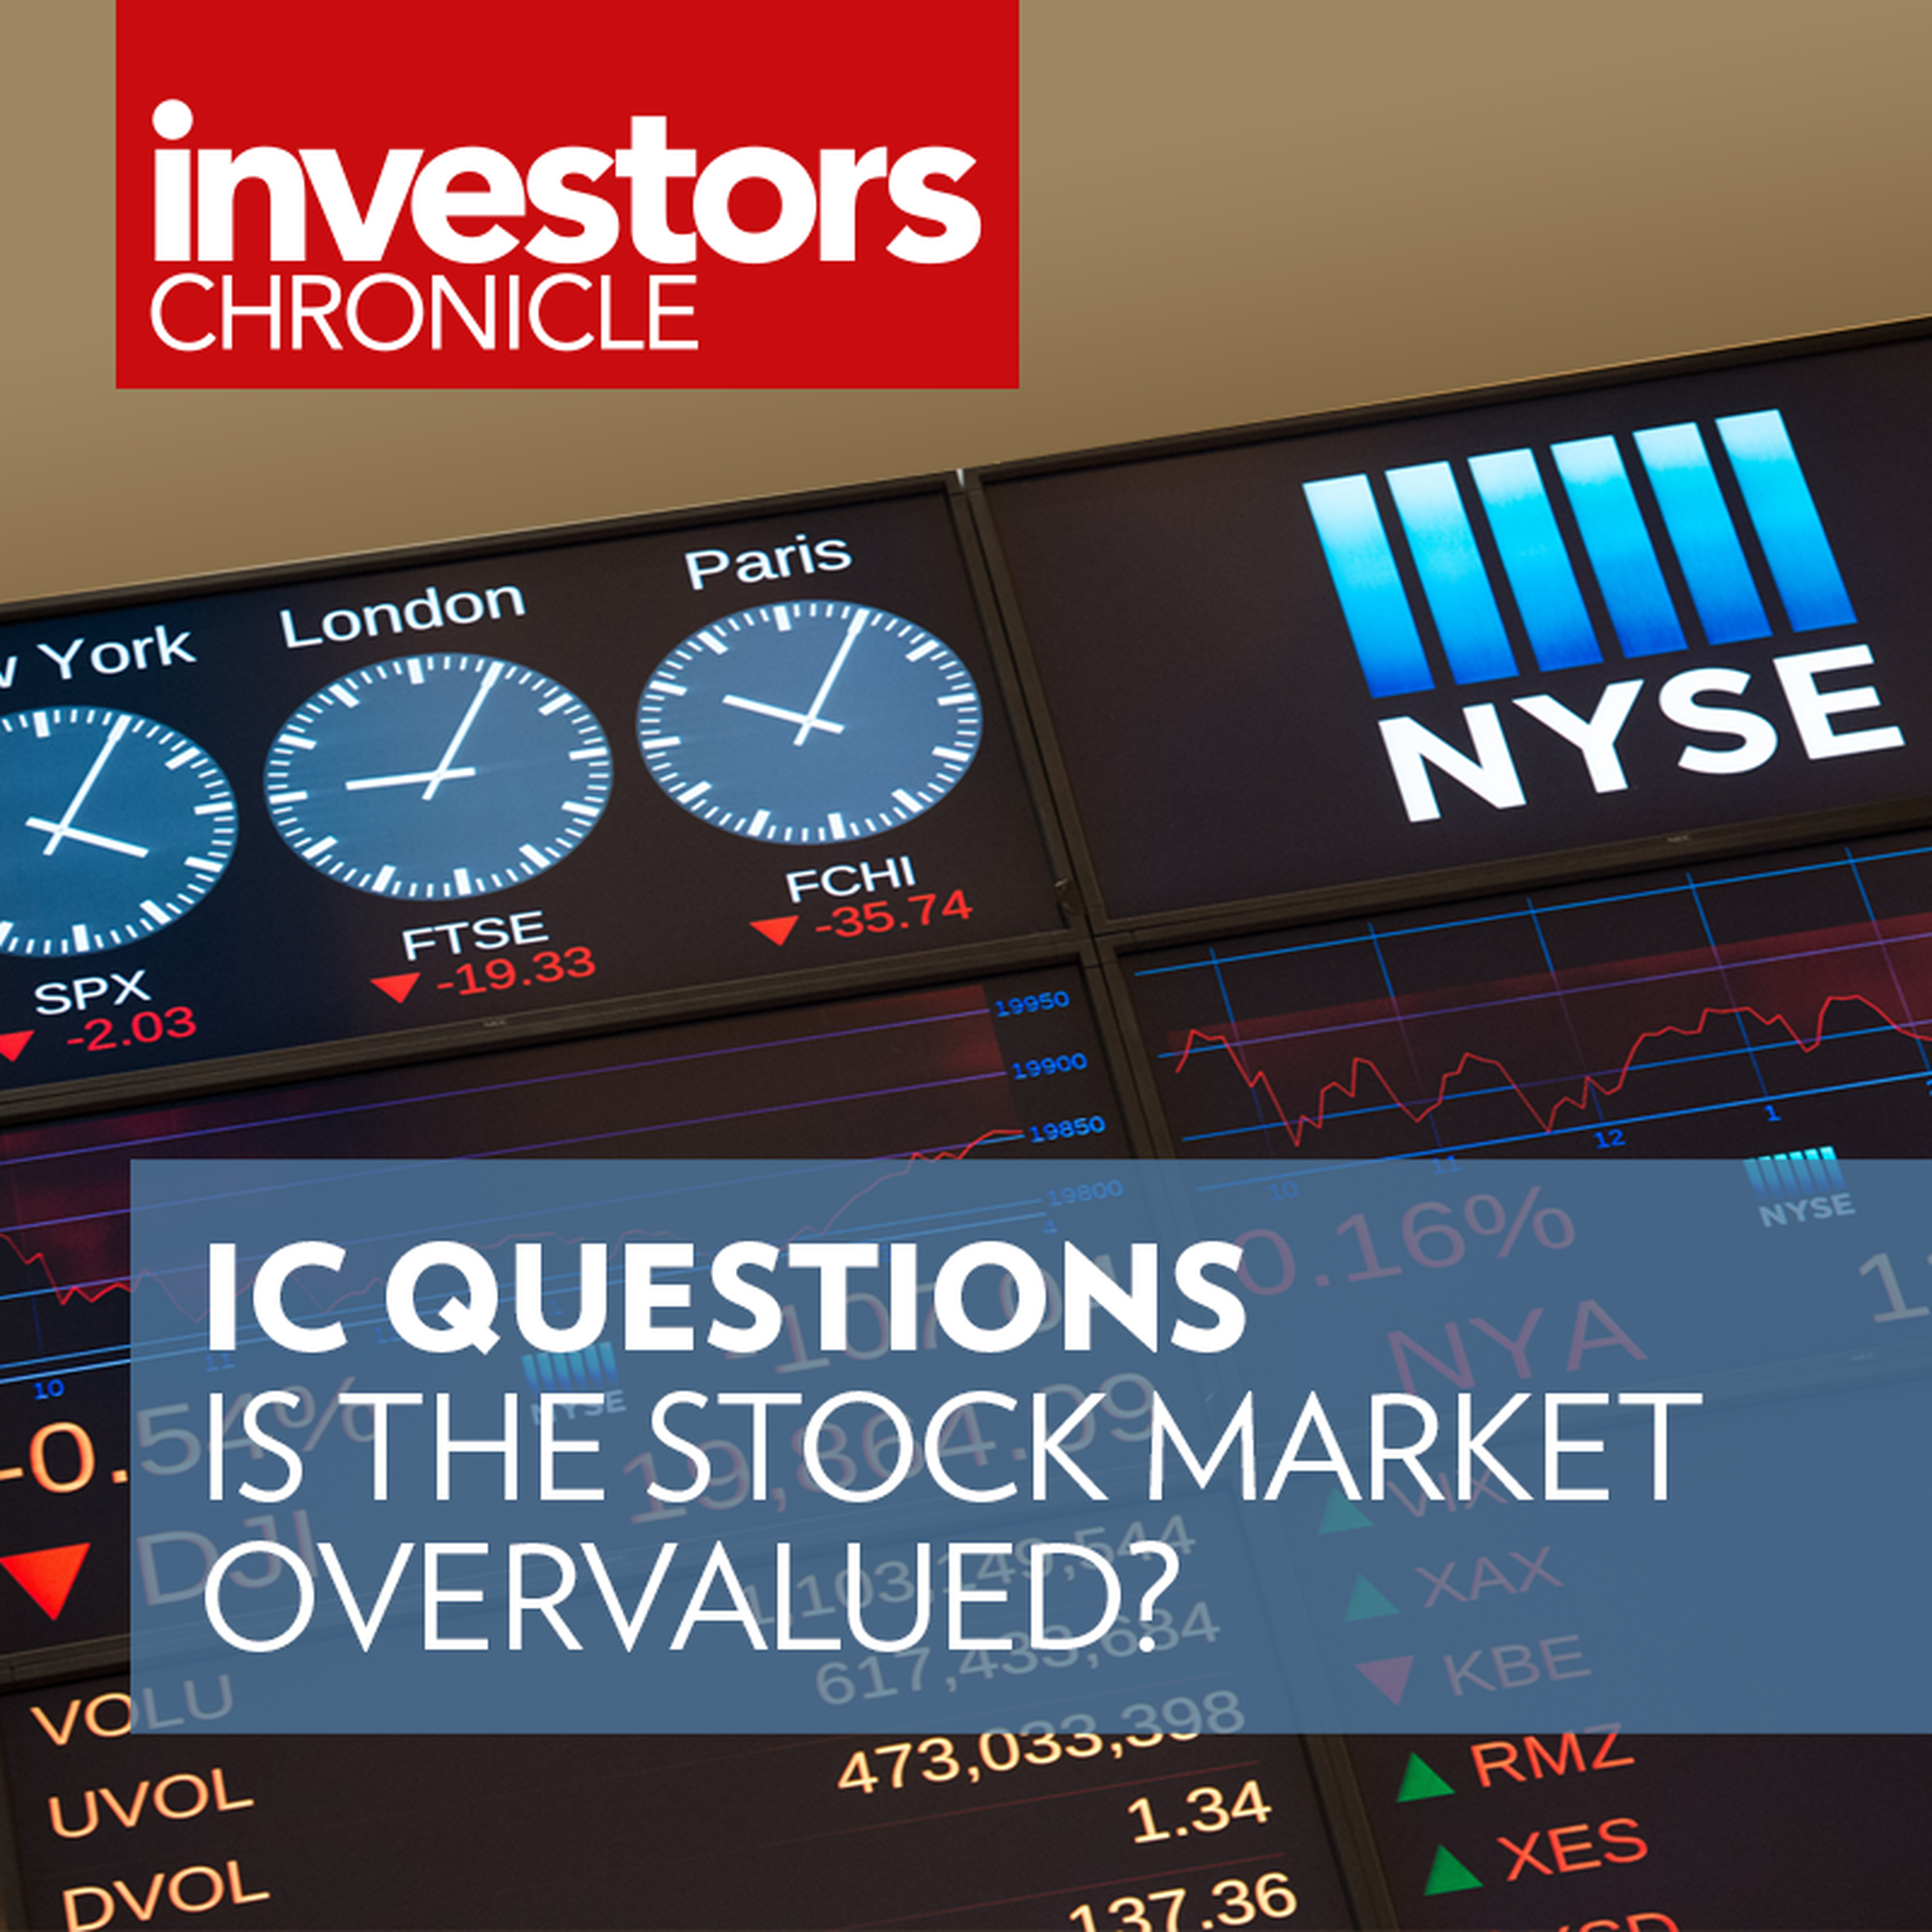 IC Questions: Is the stock market overvalued?